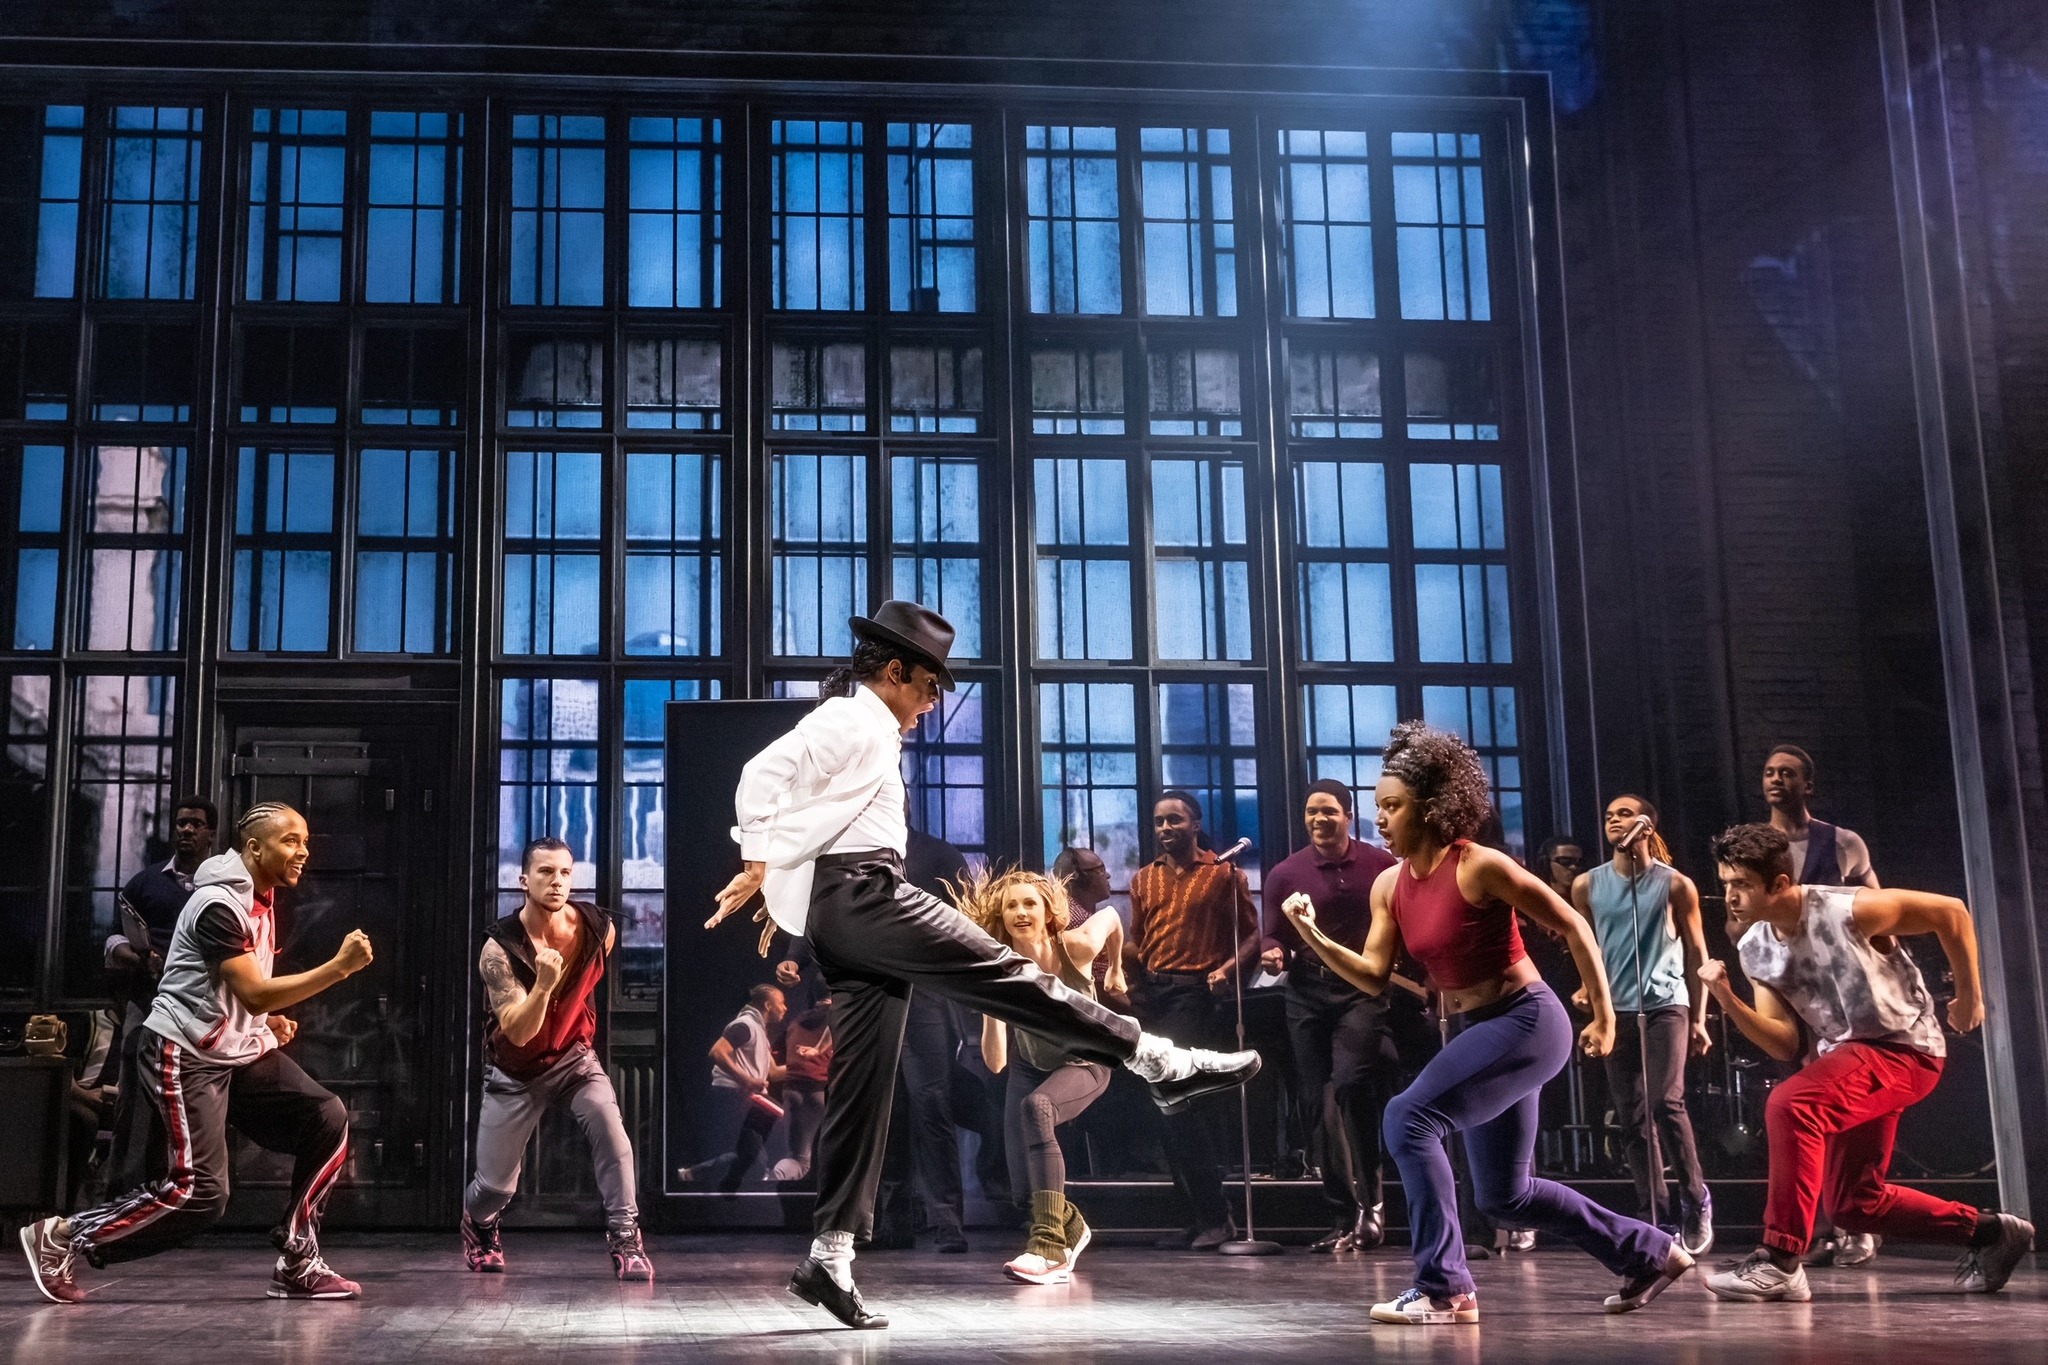 Roman Banks as Michael Jackson in MJ The Musical.